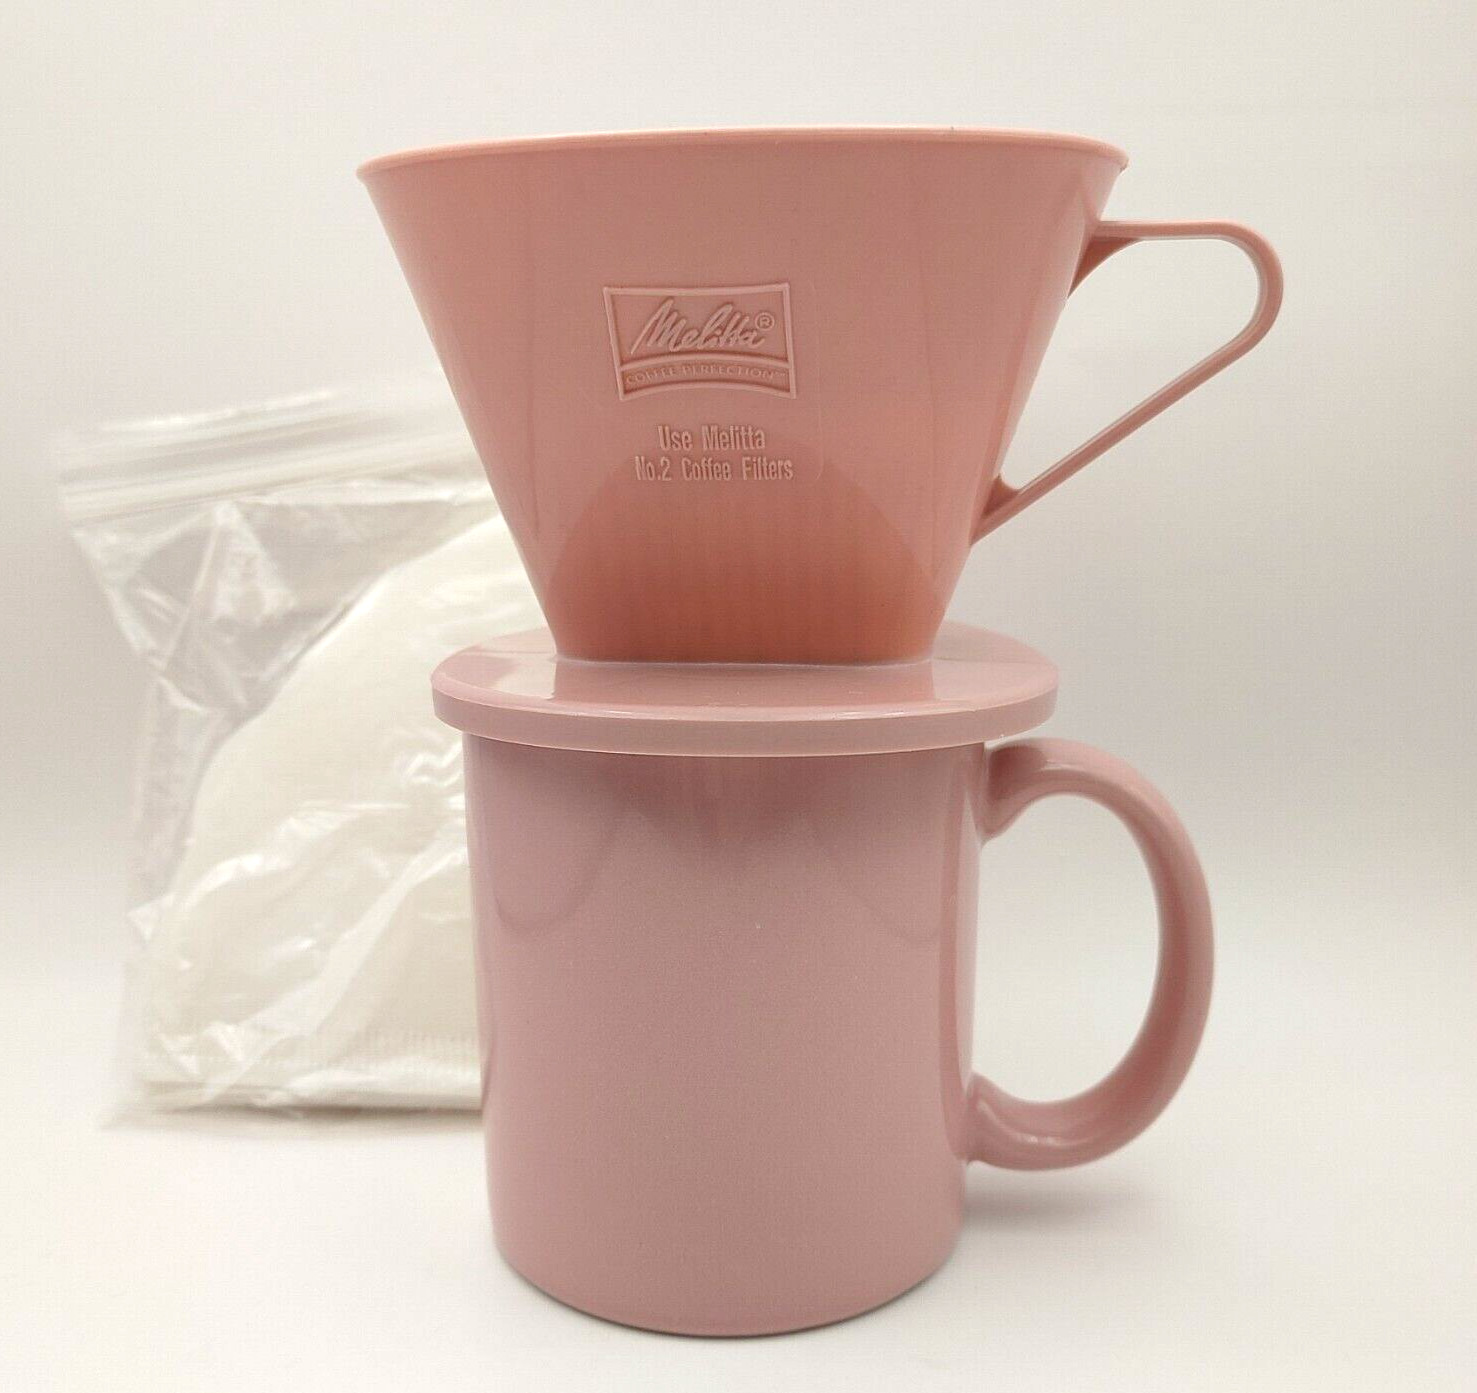 Melitta Perfect Start Pour Over Coffee Maker Set - Pink Ceramic Cup & Filters